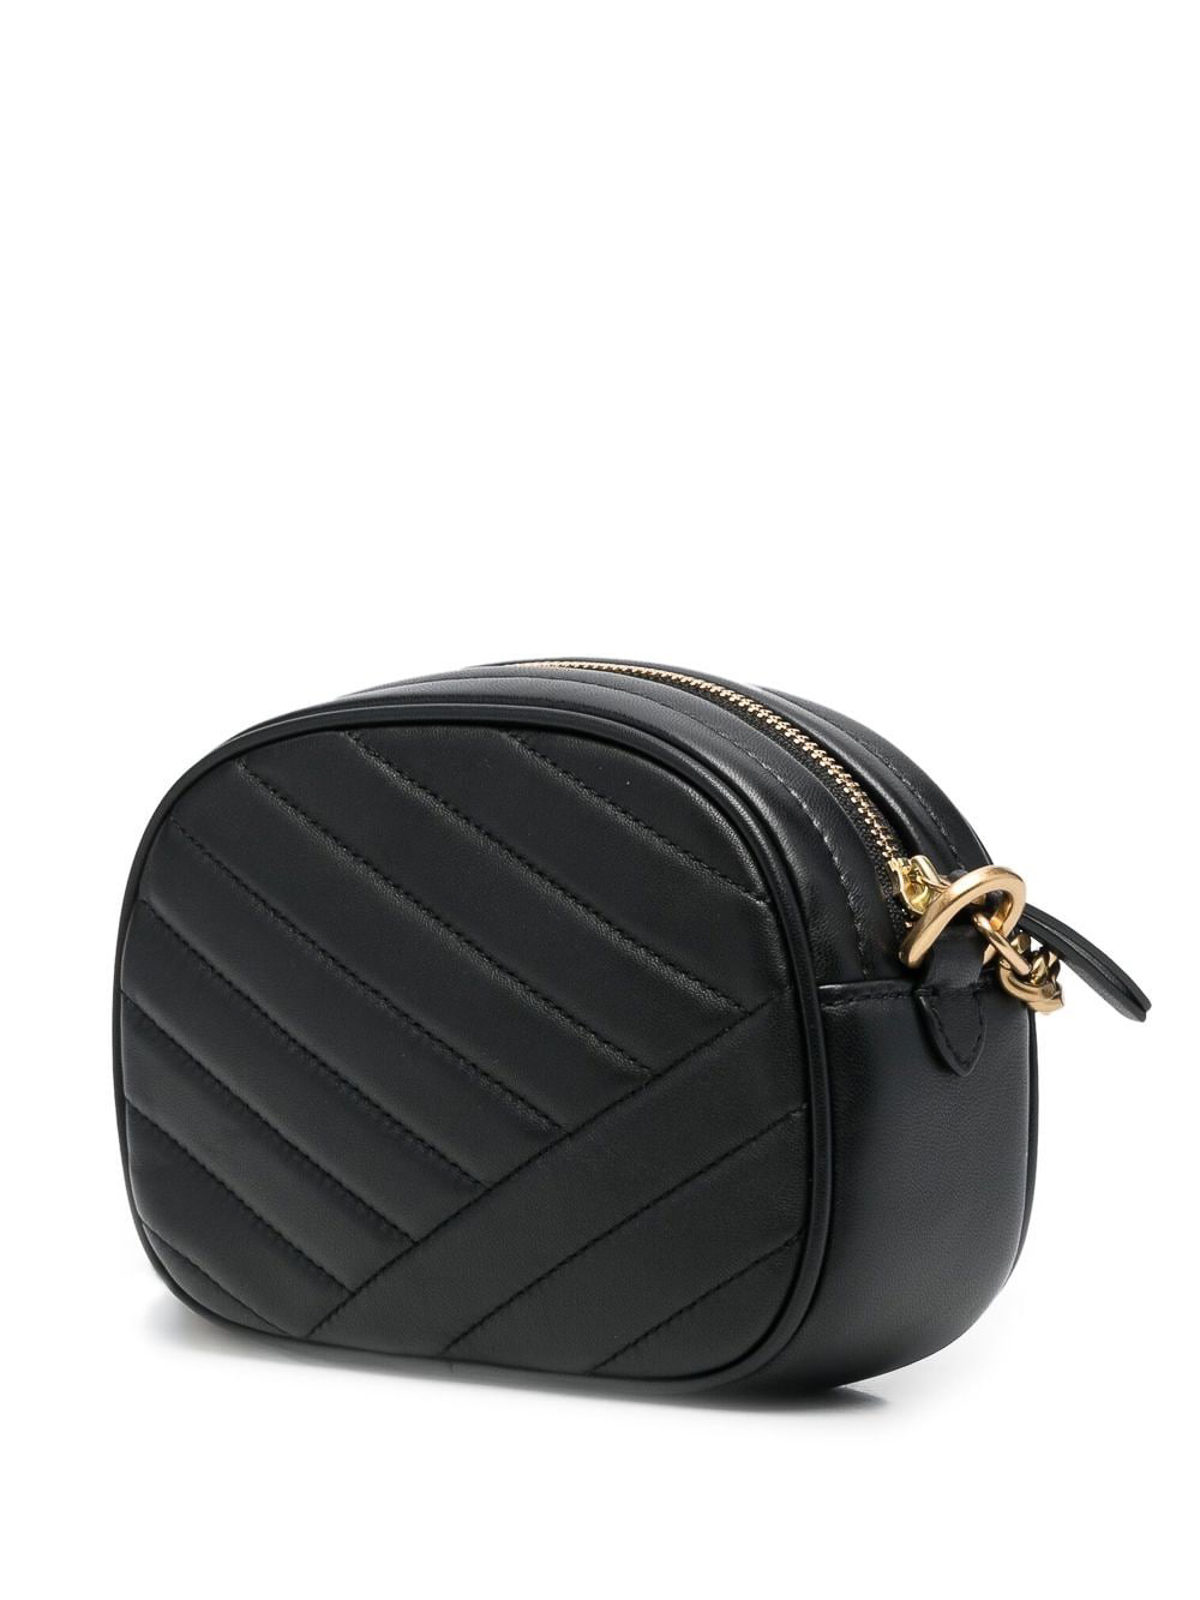 Kira Small Leather Shoulder Bag in Black - Tory Burch